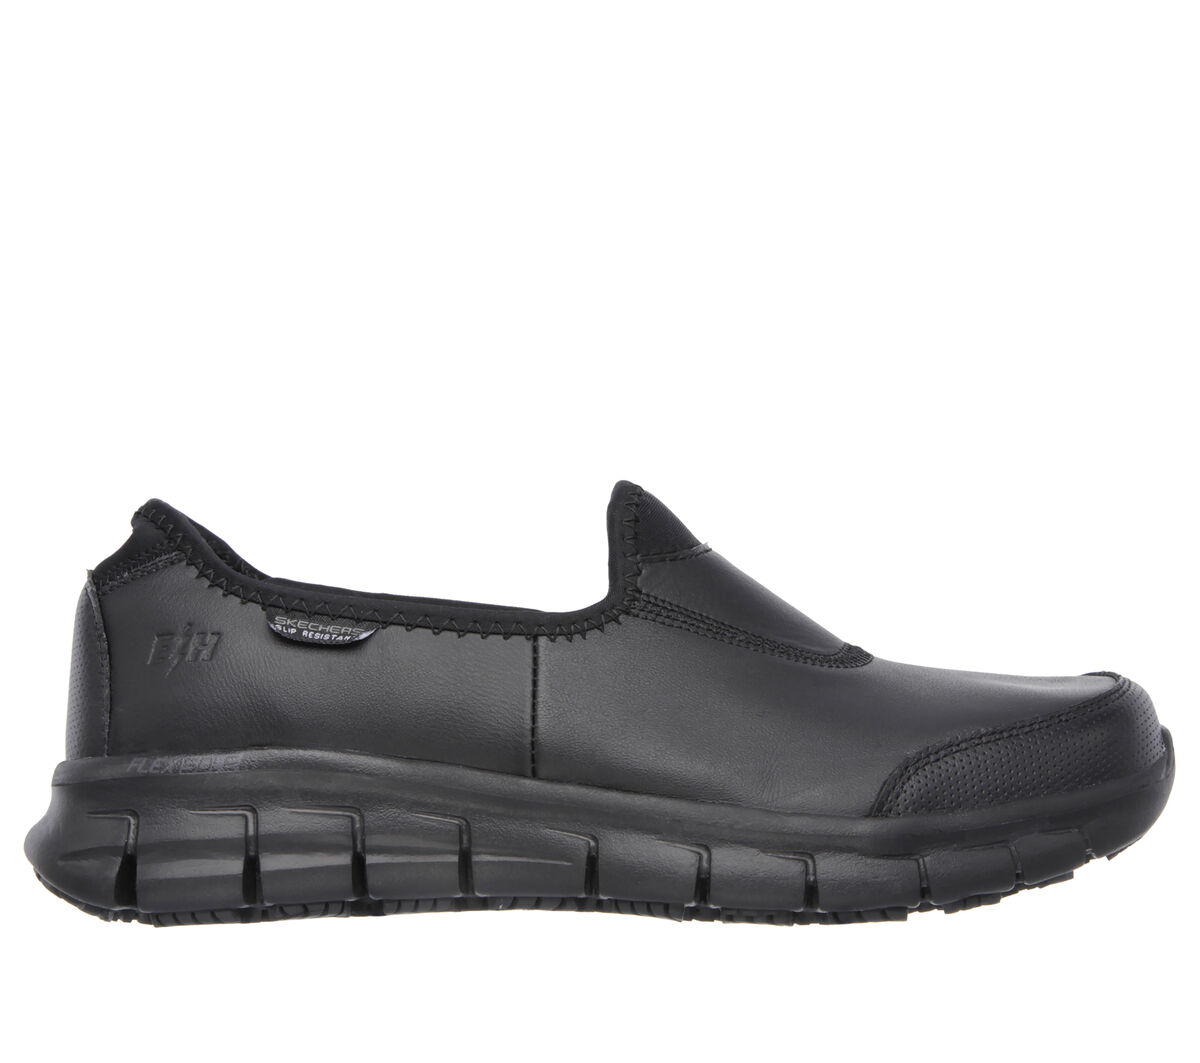 ret Fabel Viva Shop the Work: Relaxed Fit - Sure Track | SKECHERS